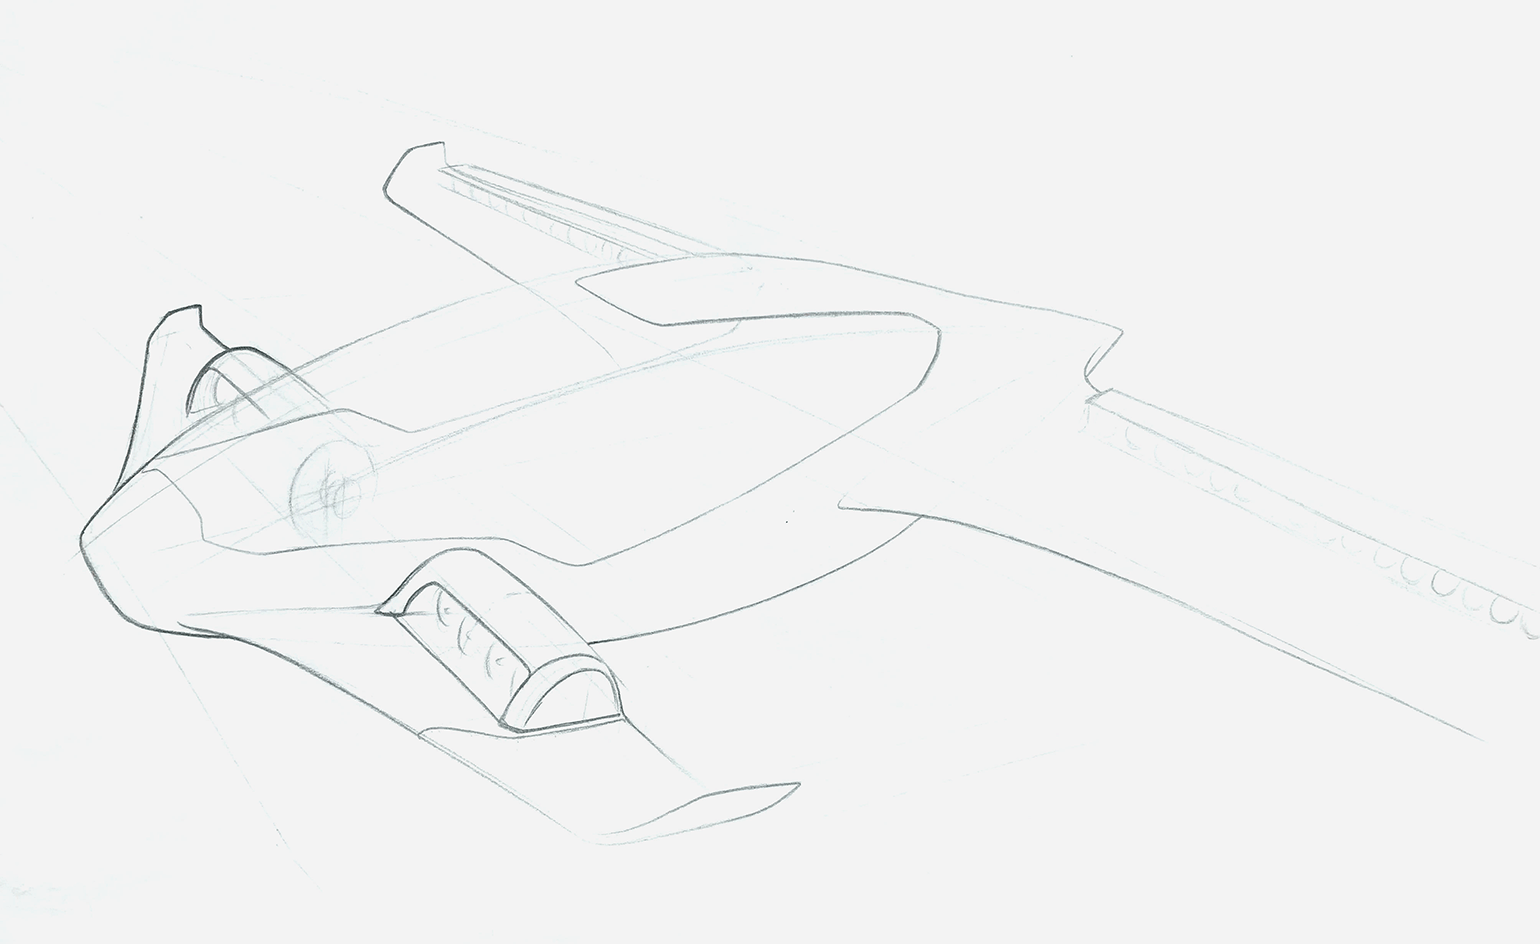 Early sketches of the five-seater Lilium Jet, drawn by Mathis Cosson